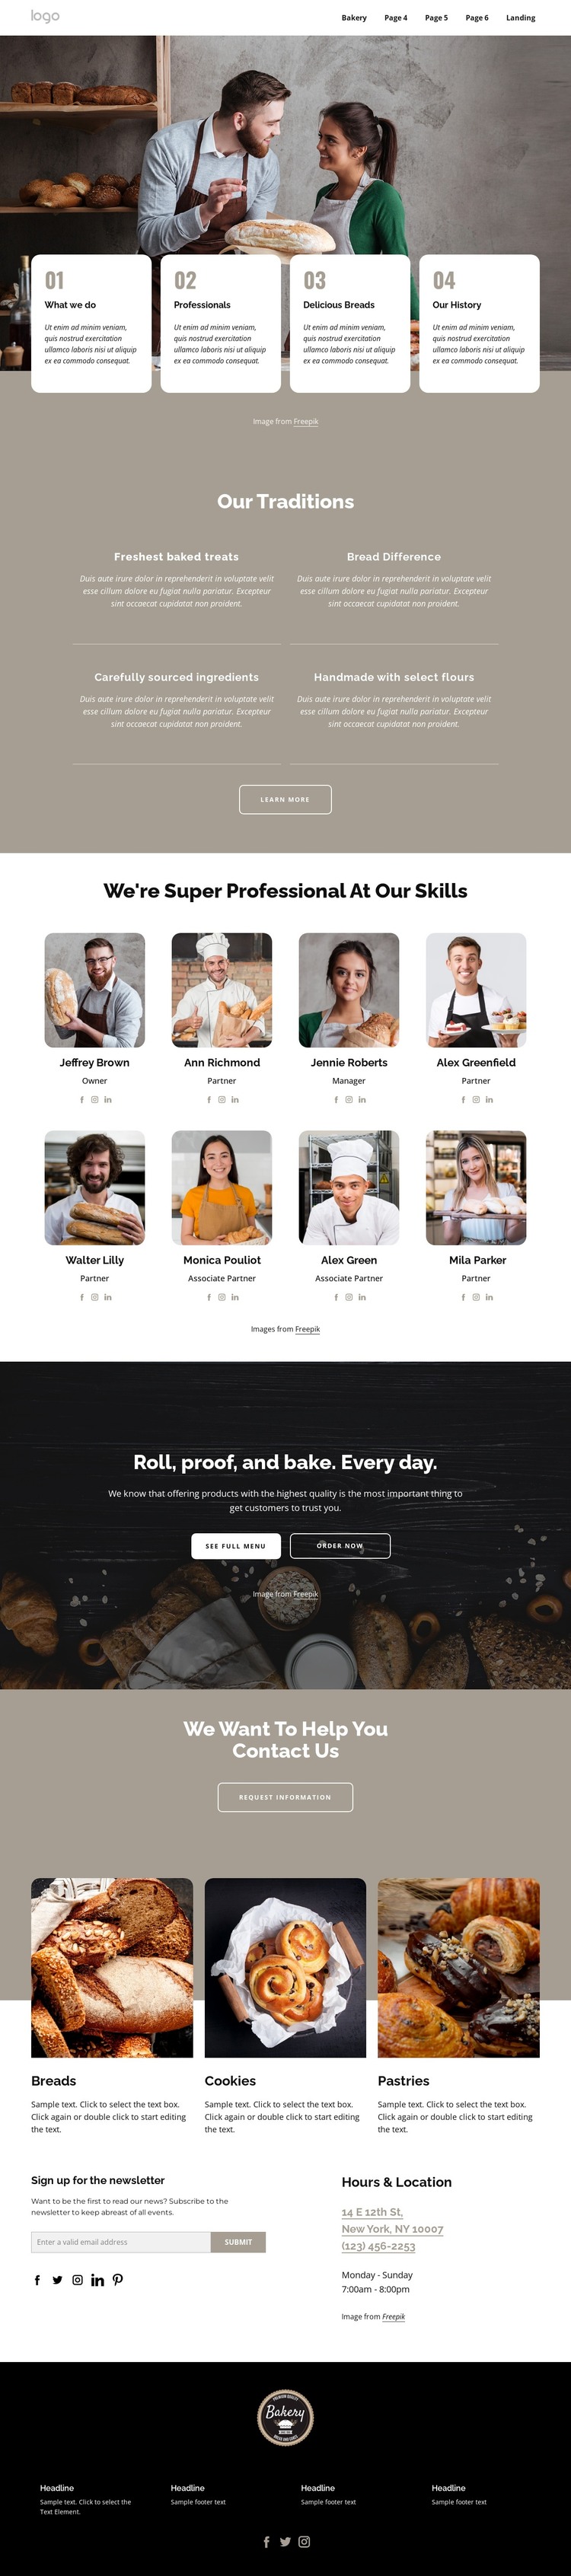 We are professional bakers Web Design